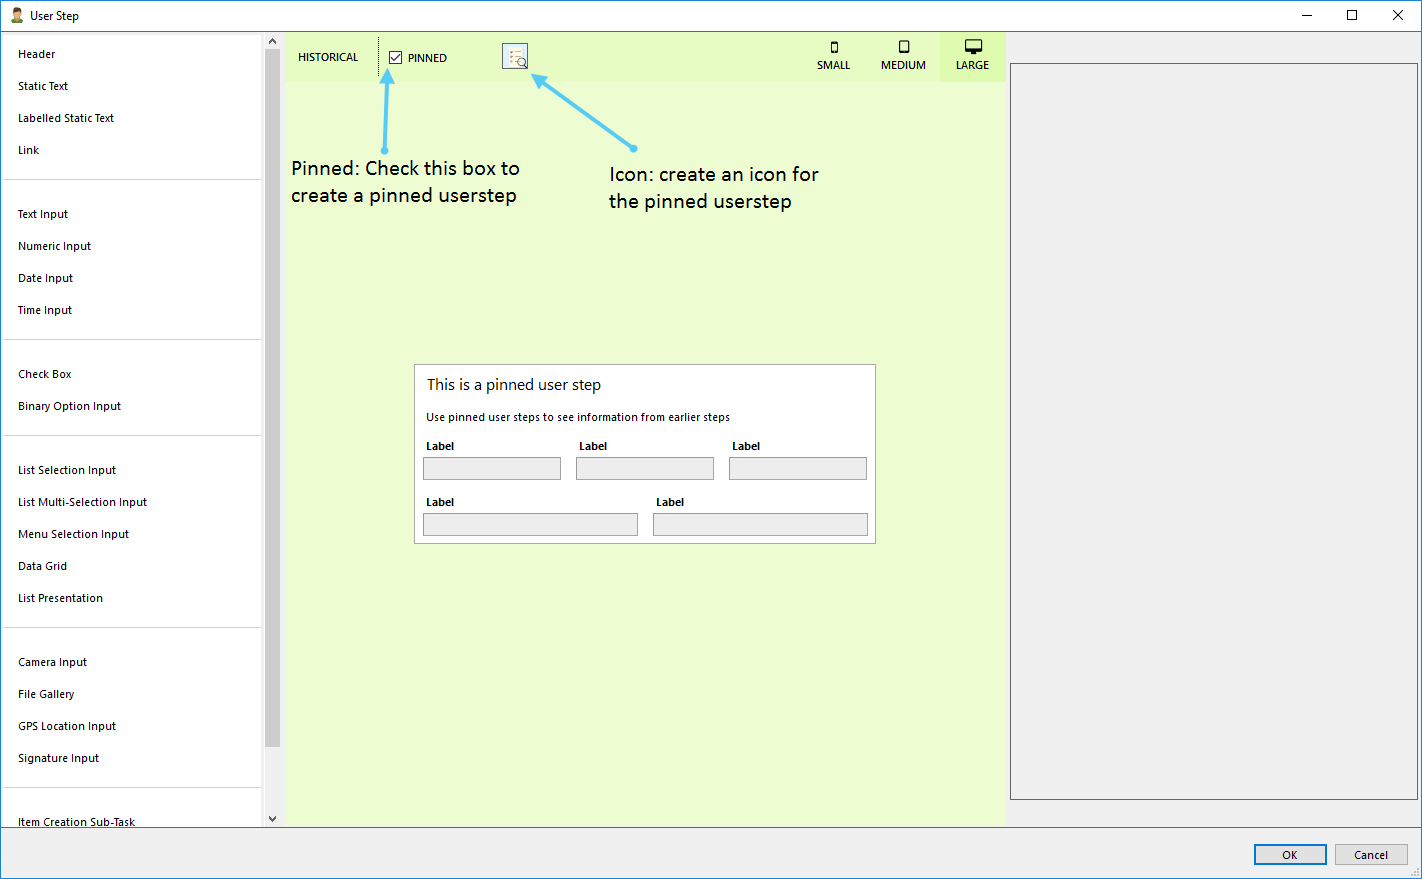 Configure a pinned user step